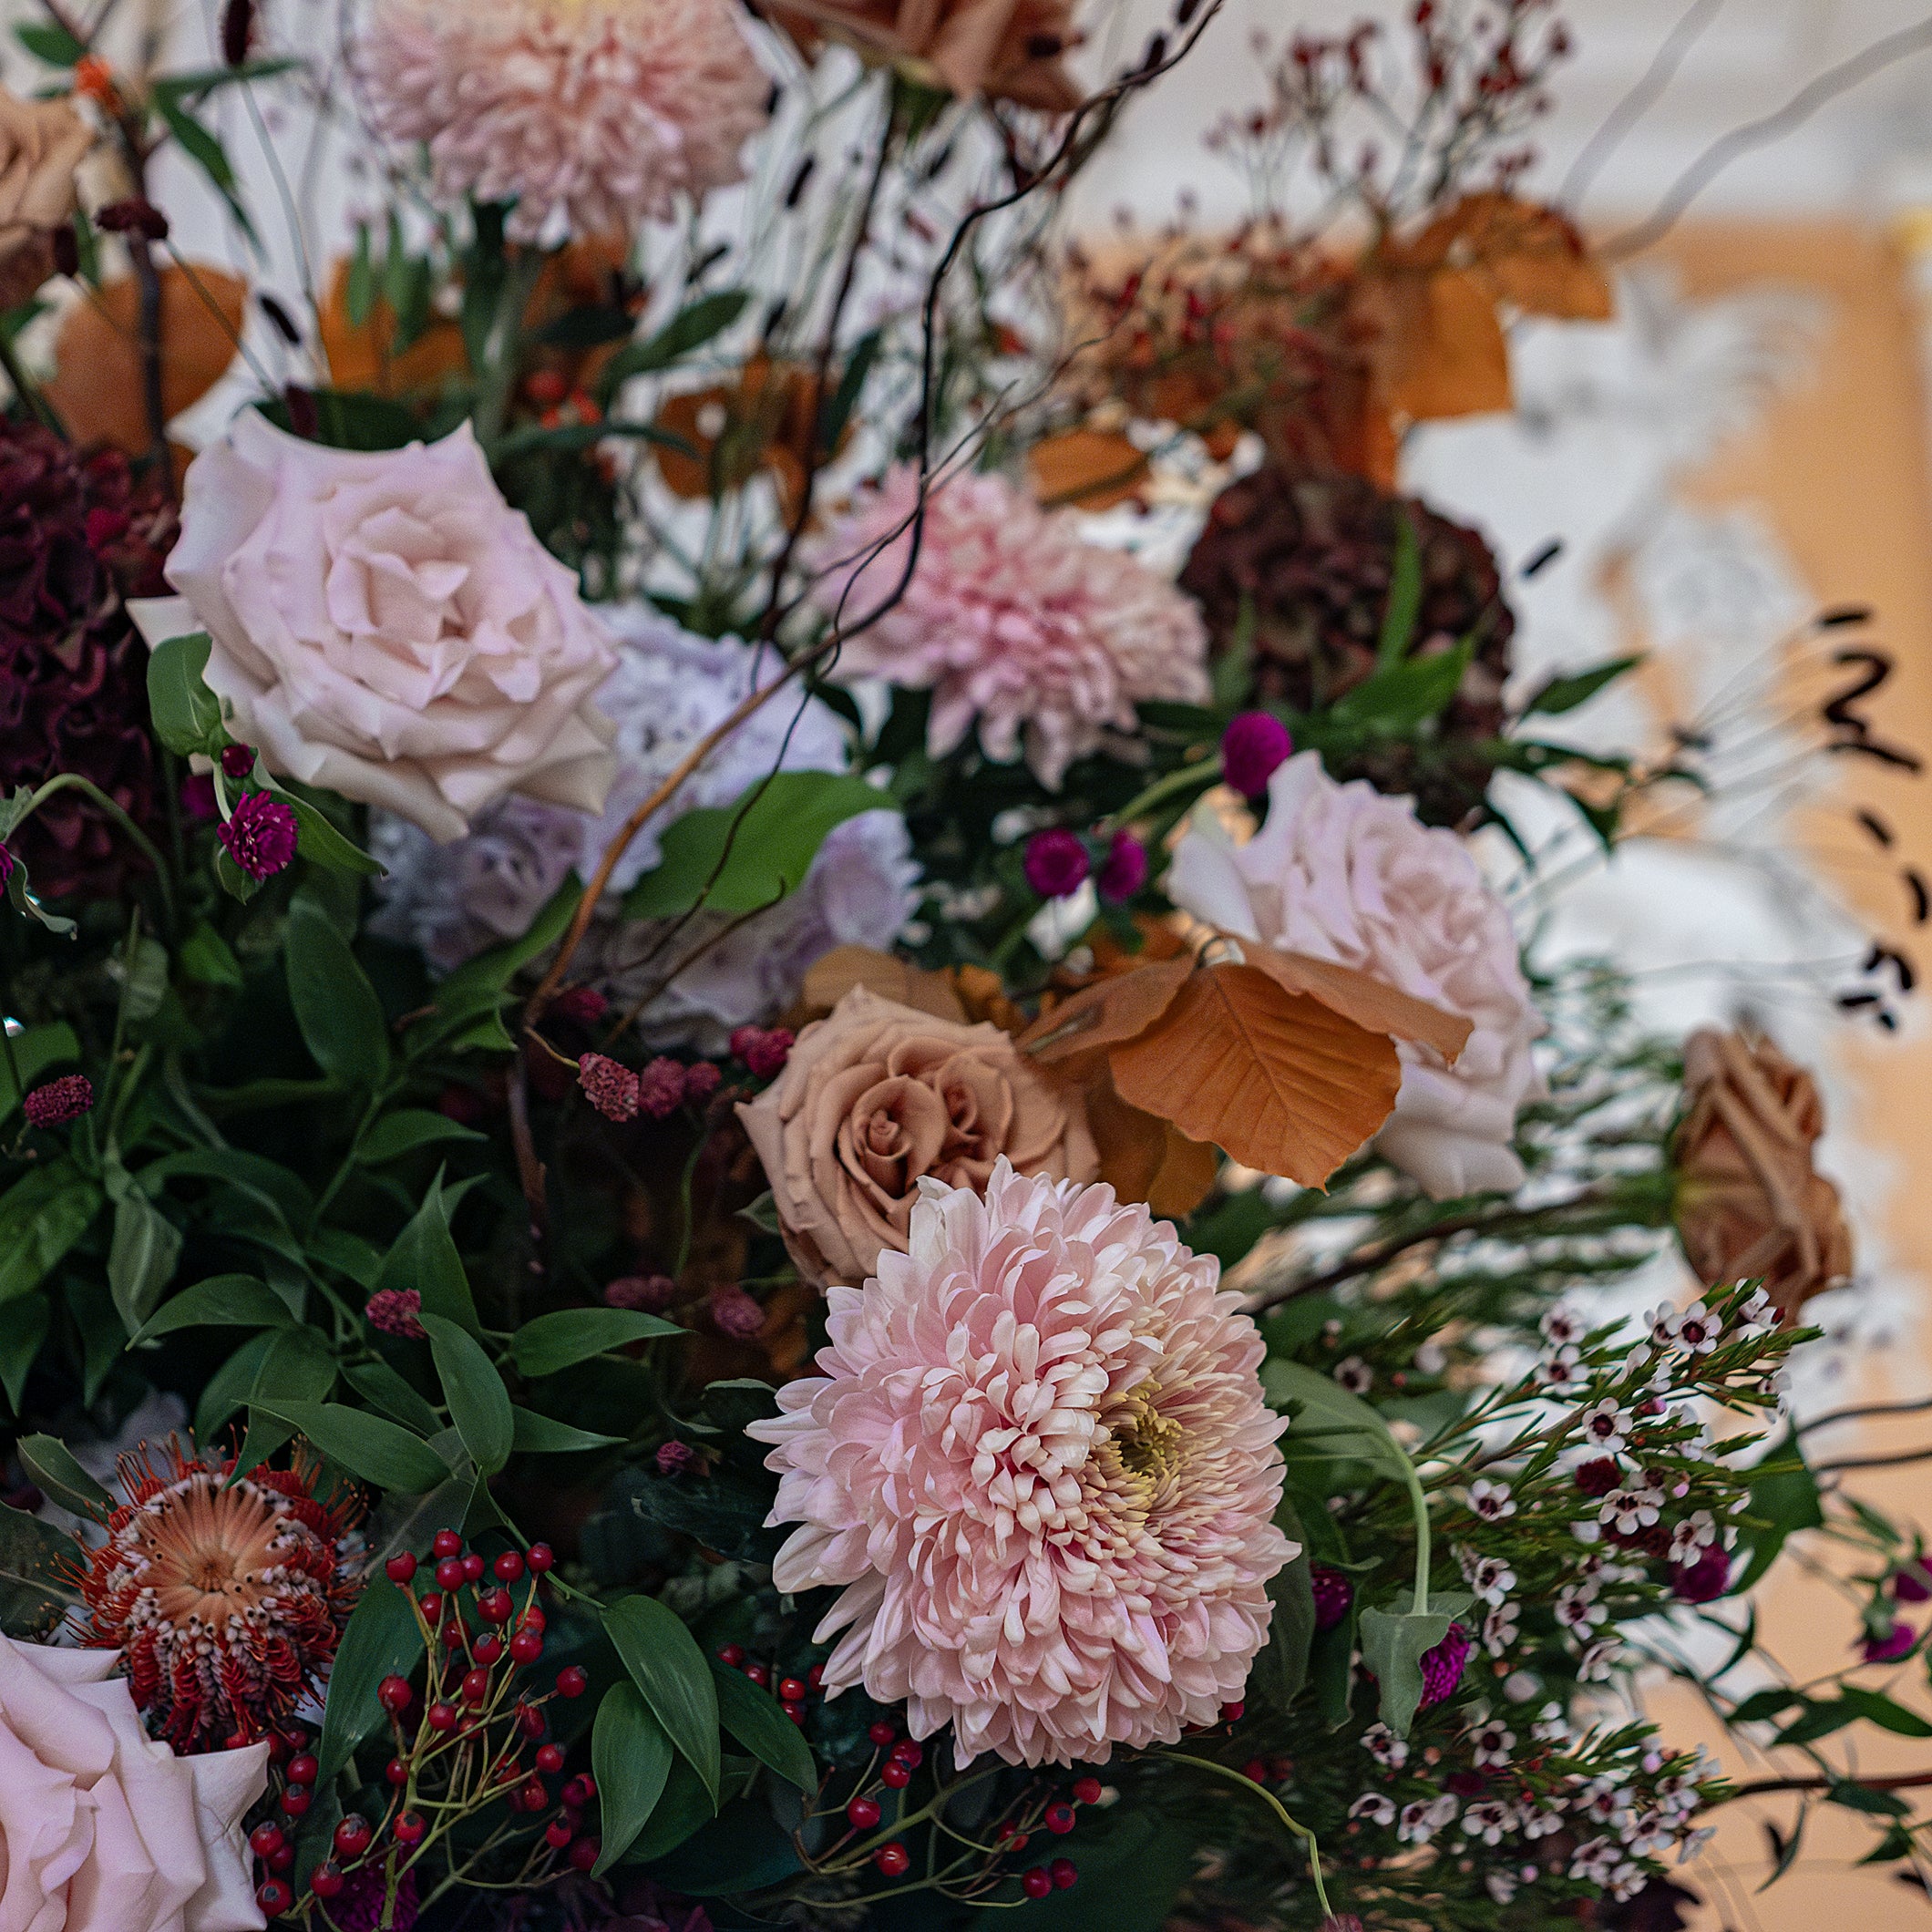 Detailed view of bespoke floral arrangement with pink, green, and light brown stems and flowers